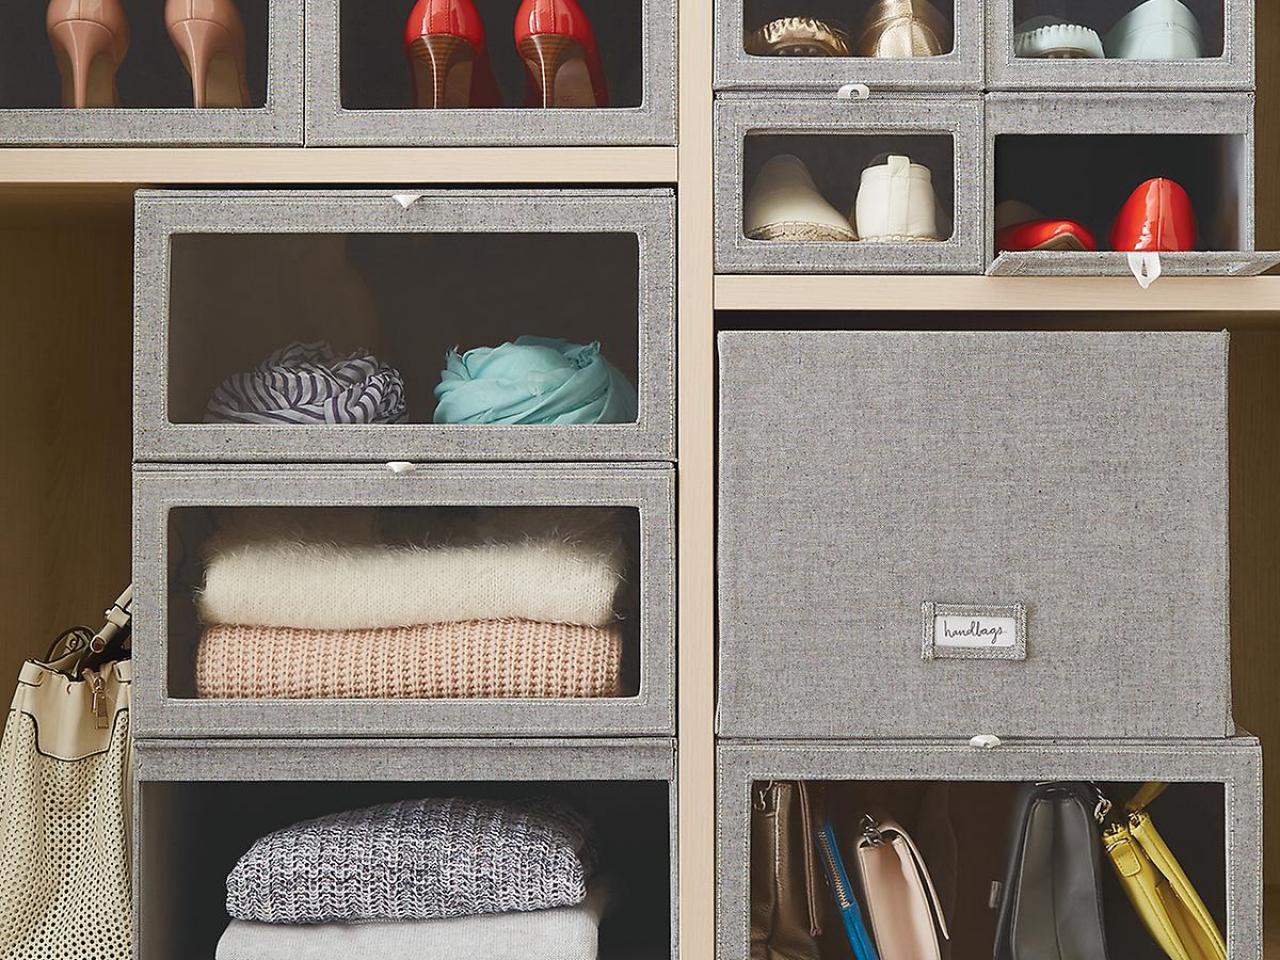 https://hgtvhome.sndimg.com/content/dam/images/hgtv/products/2018/11/19/2/rx_thecontainerstore_drop-front-sweater-box.jpg.rend.hgtvcom.1280.960.suffix/1542659546401.jpeg